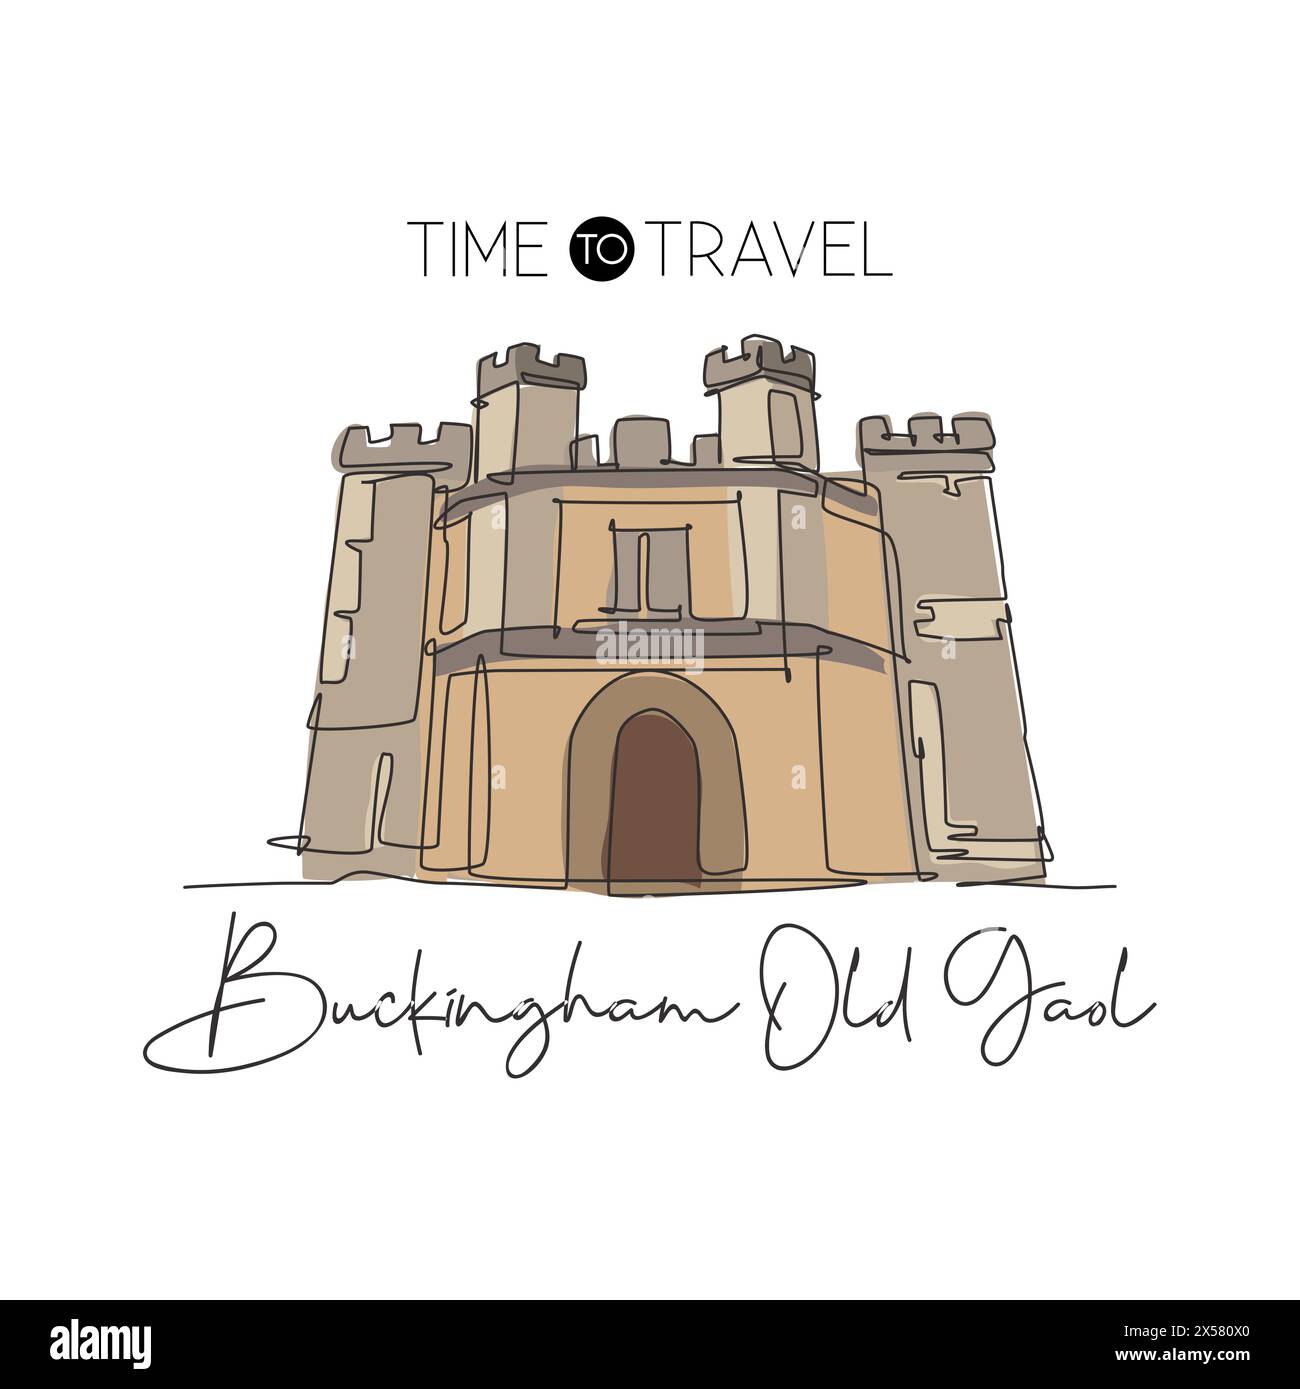 Single continuous line drawing Buckingham Old Gaol. Famous museum in Buckinghamshire, England. World travel home decor wall art poster print concept. Stock Vector